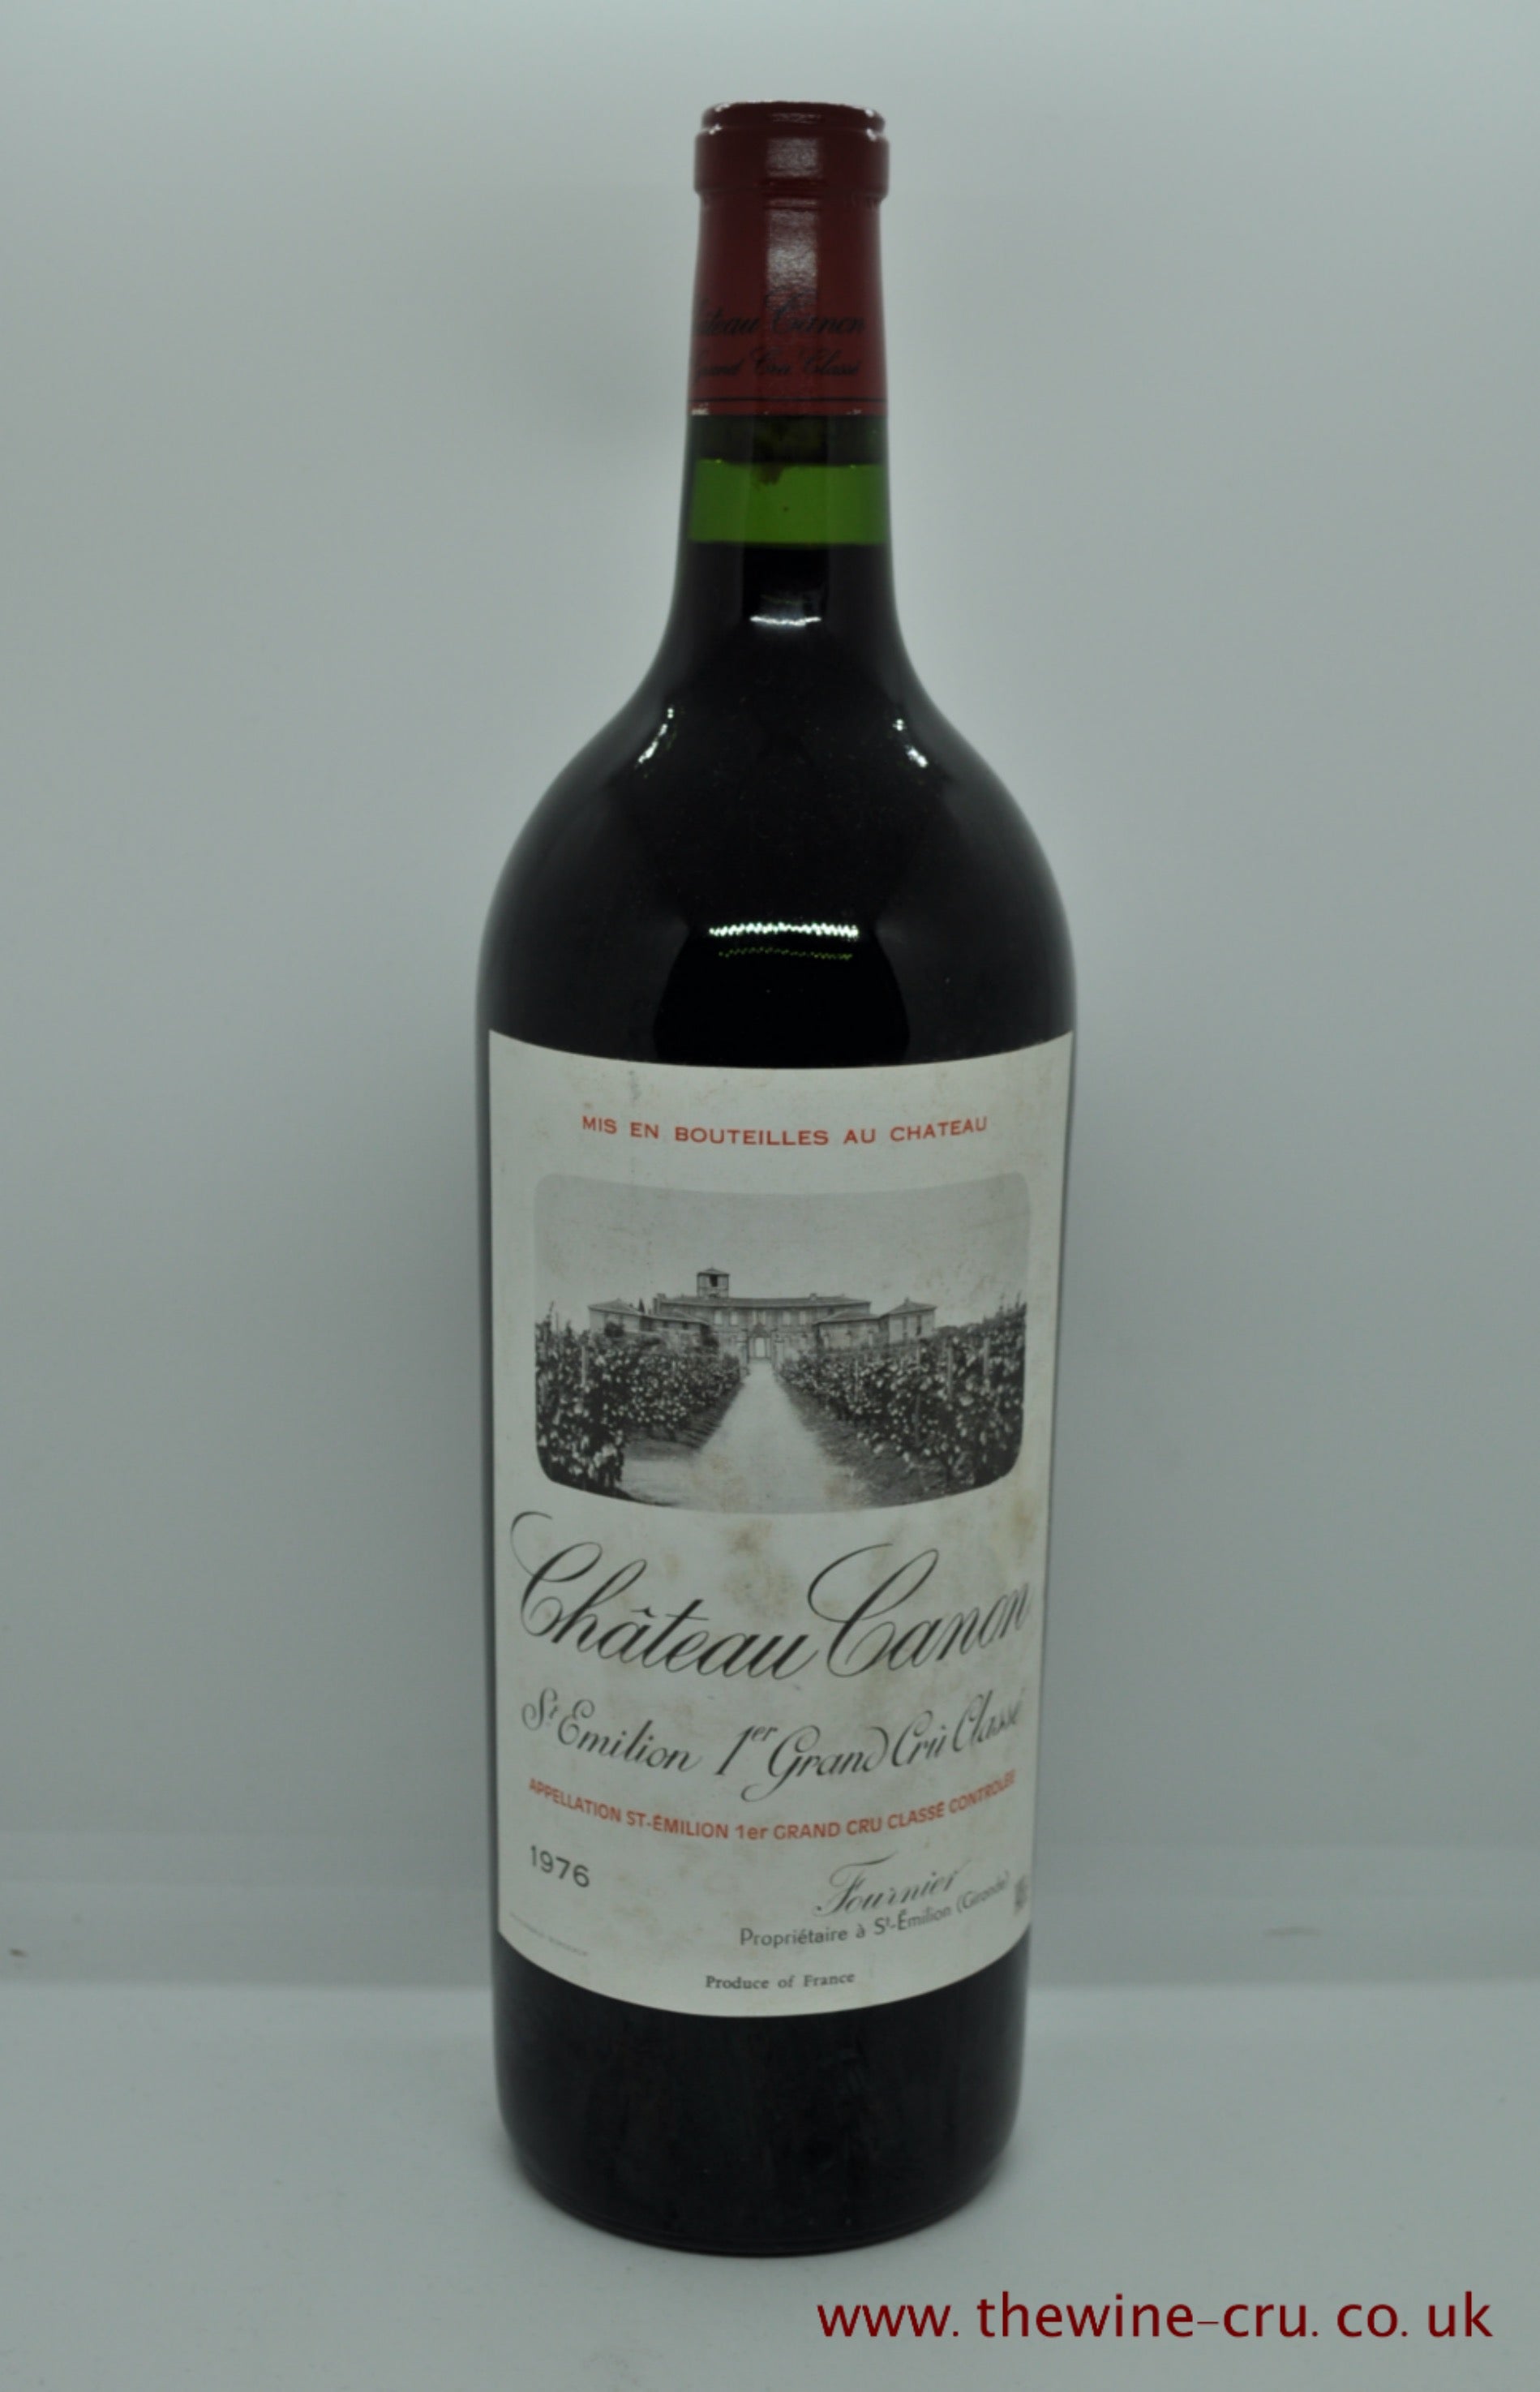 A magnum bottle of 1976 vintage red wine. Chateau Canon, France, Bordeaux. The bottle is in excellent condition with the wine level being in neck. Immediate delivery. Free local delivery. Gift wrapping available.